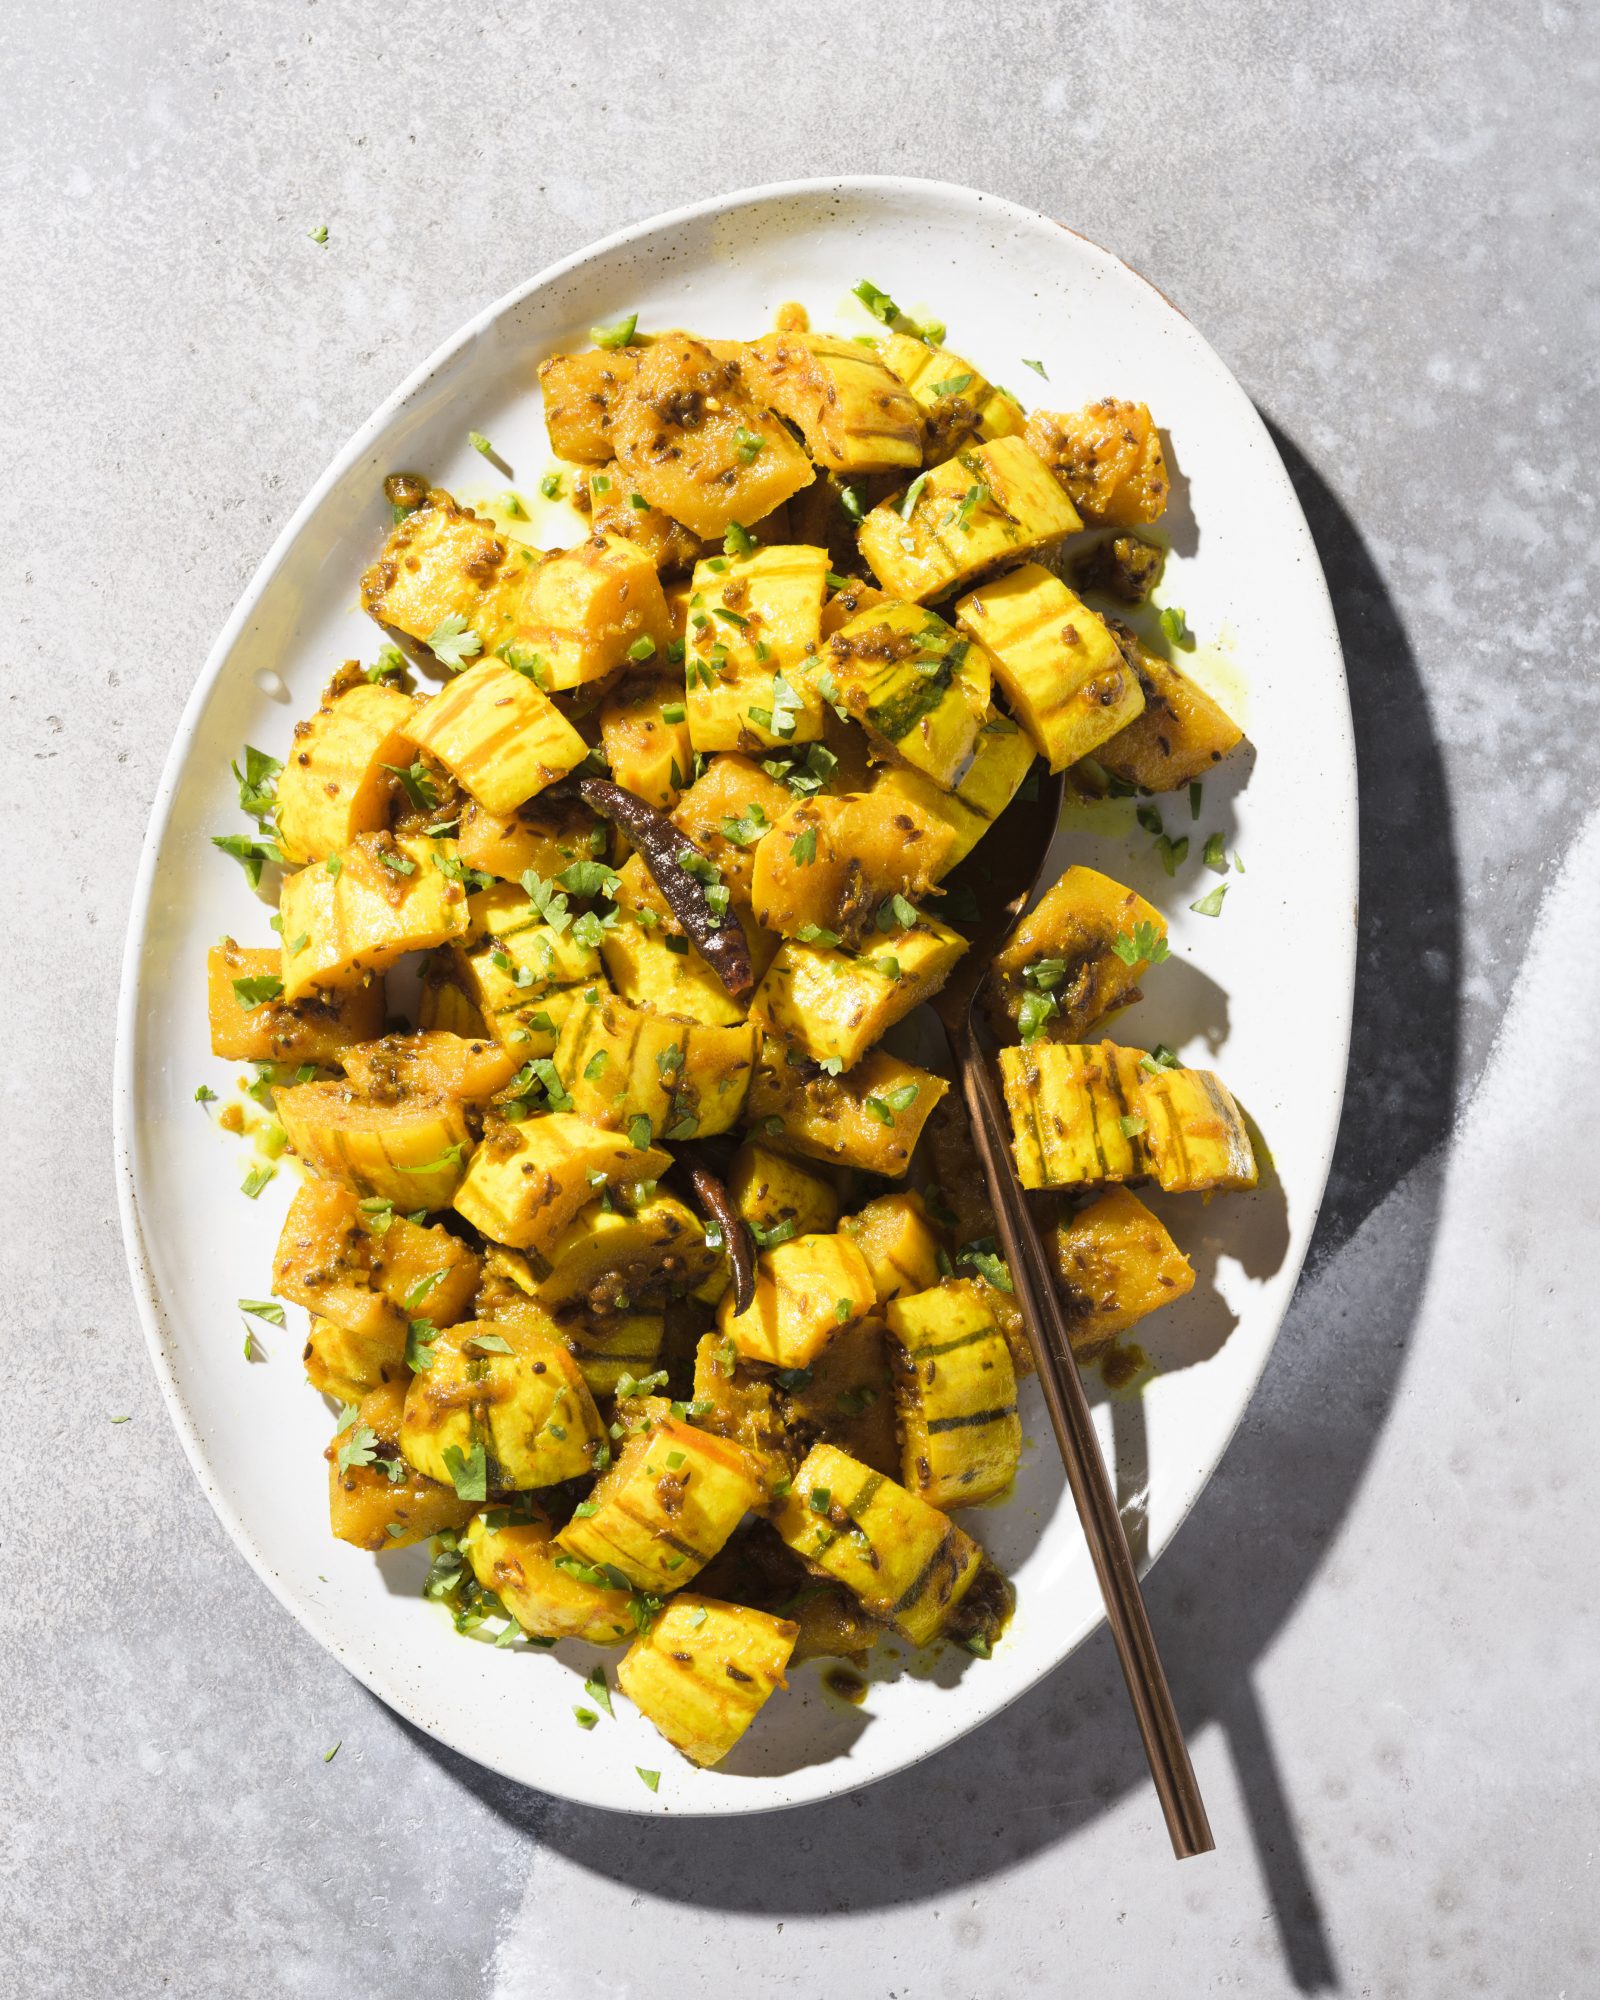 Spicy sweet dry curried squash v